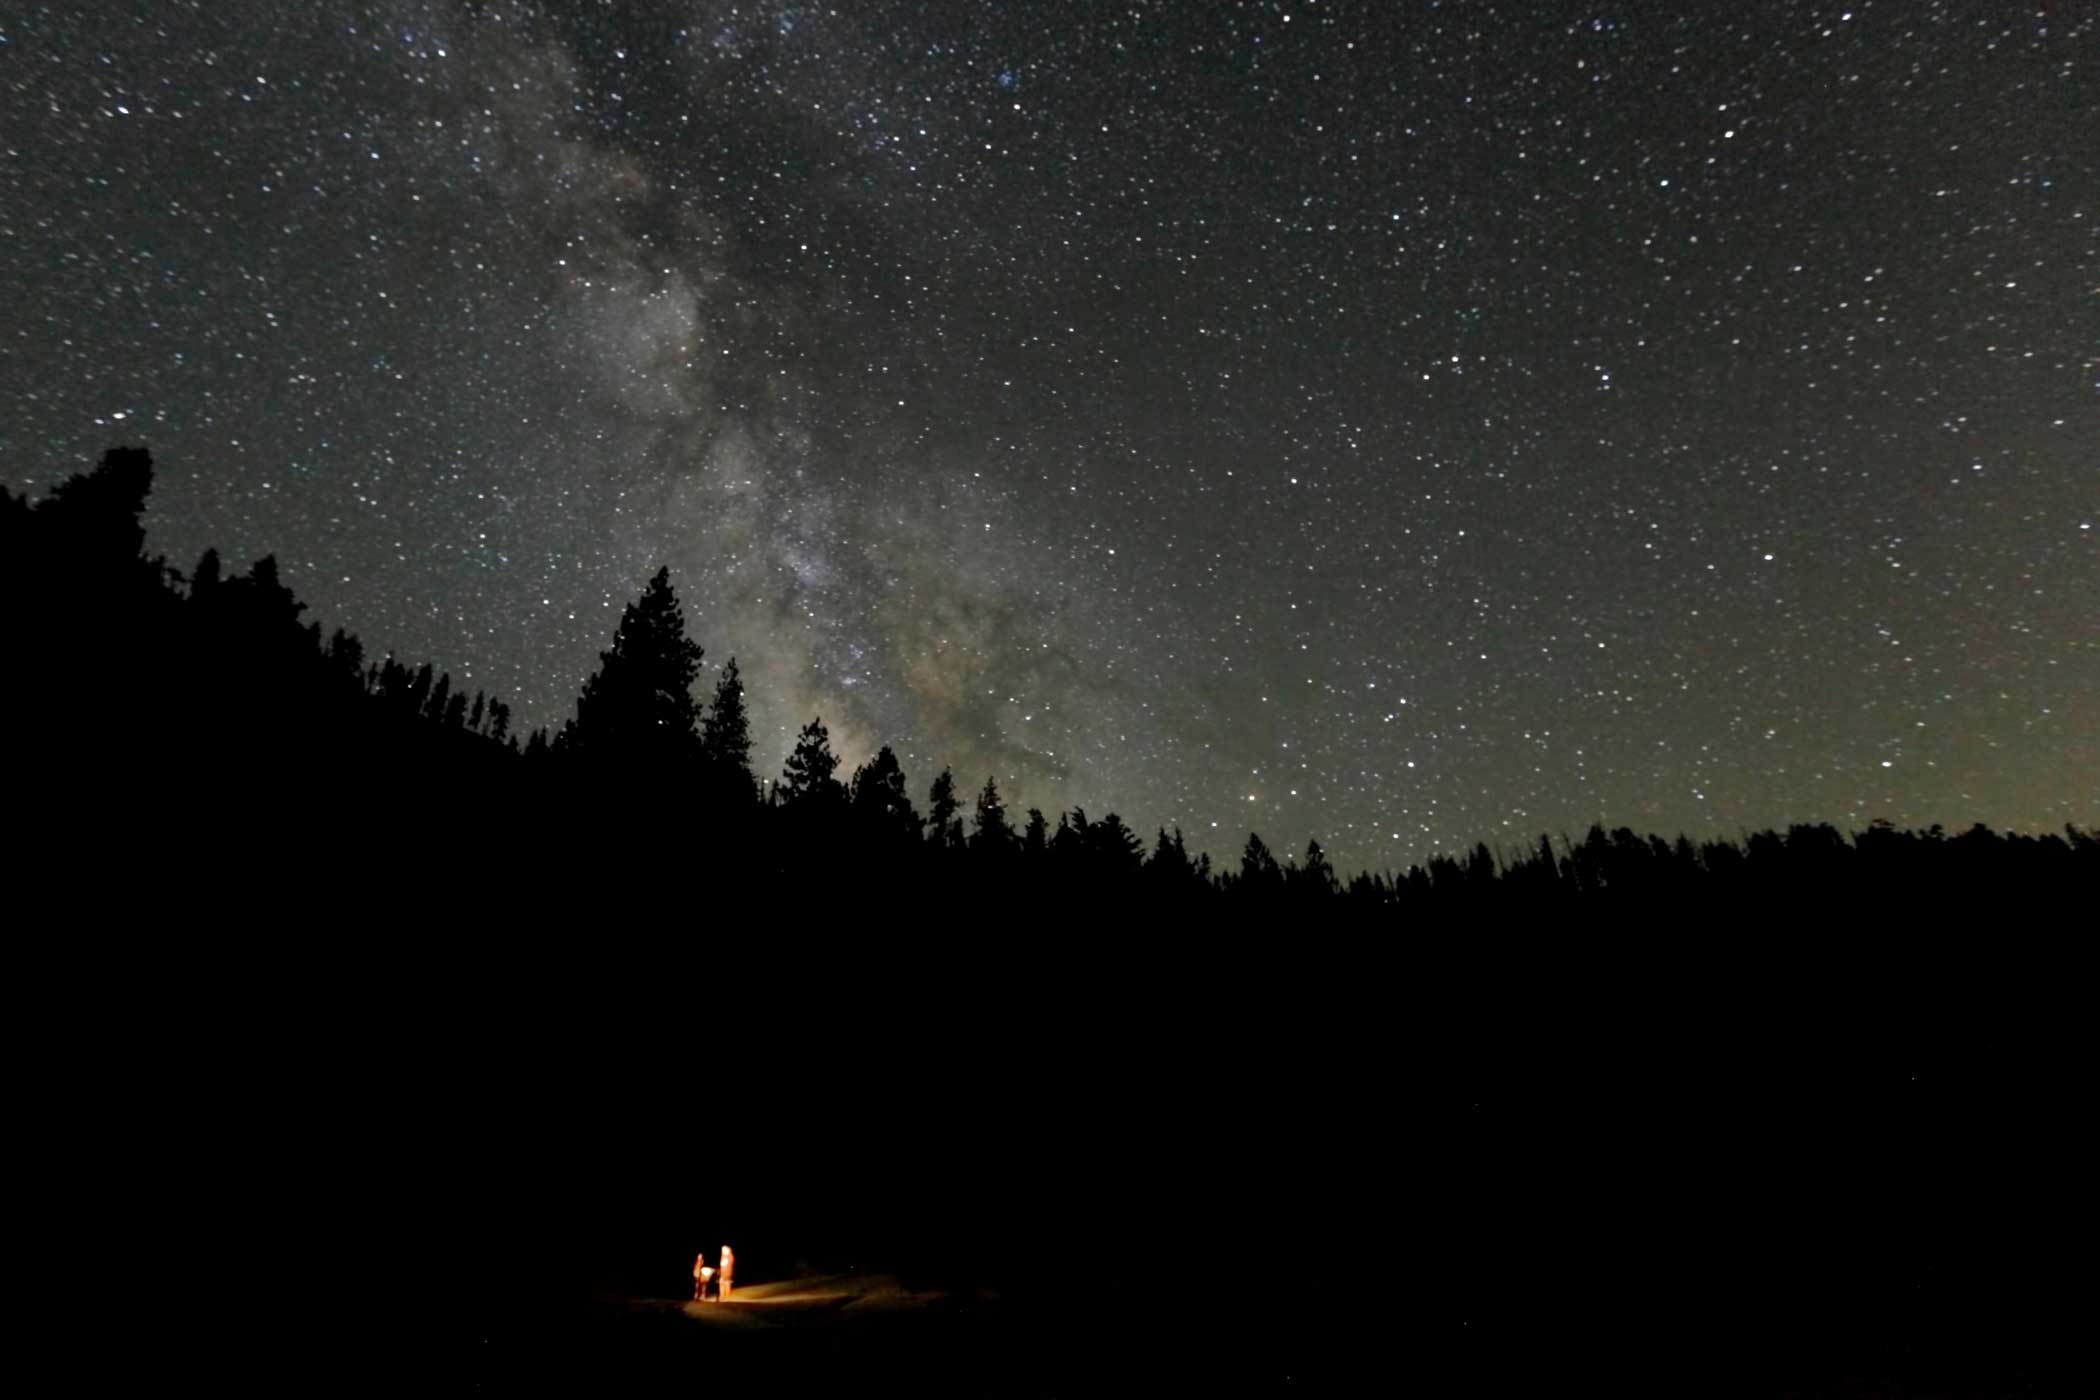 The photographer came across two hikers lost in the wilderness of Yosemite late one evening in July 2011. He captured this image of the tiny figures in a small bubble of torchlight set within a vast, pitch black forest beneath the immense dome of the sky. It highlights the wonder, beauty and awe of astronomy.